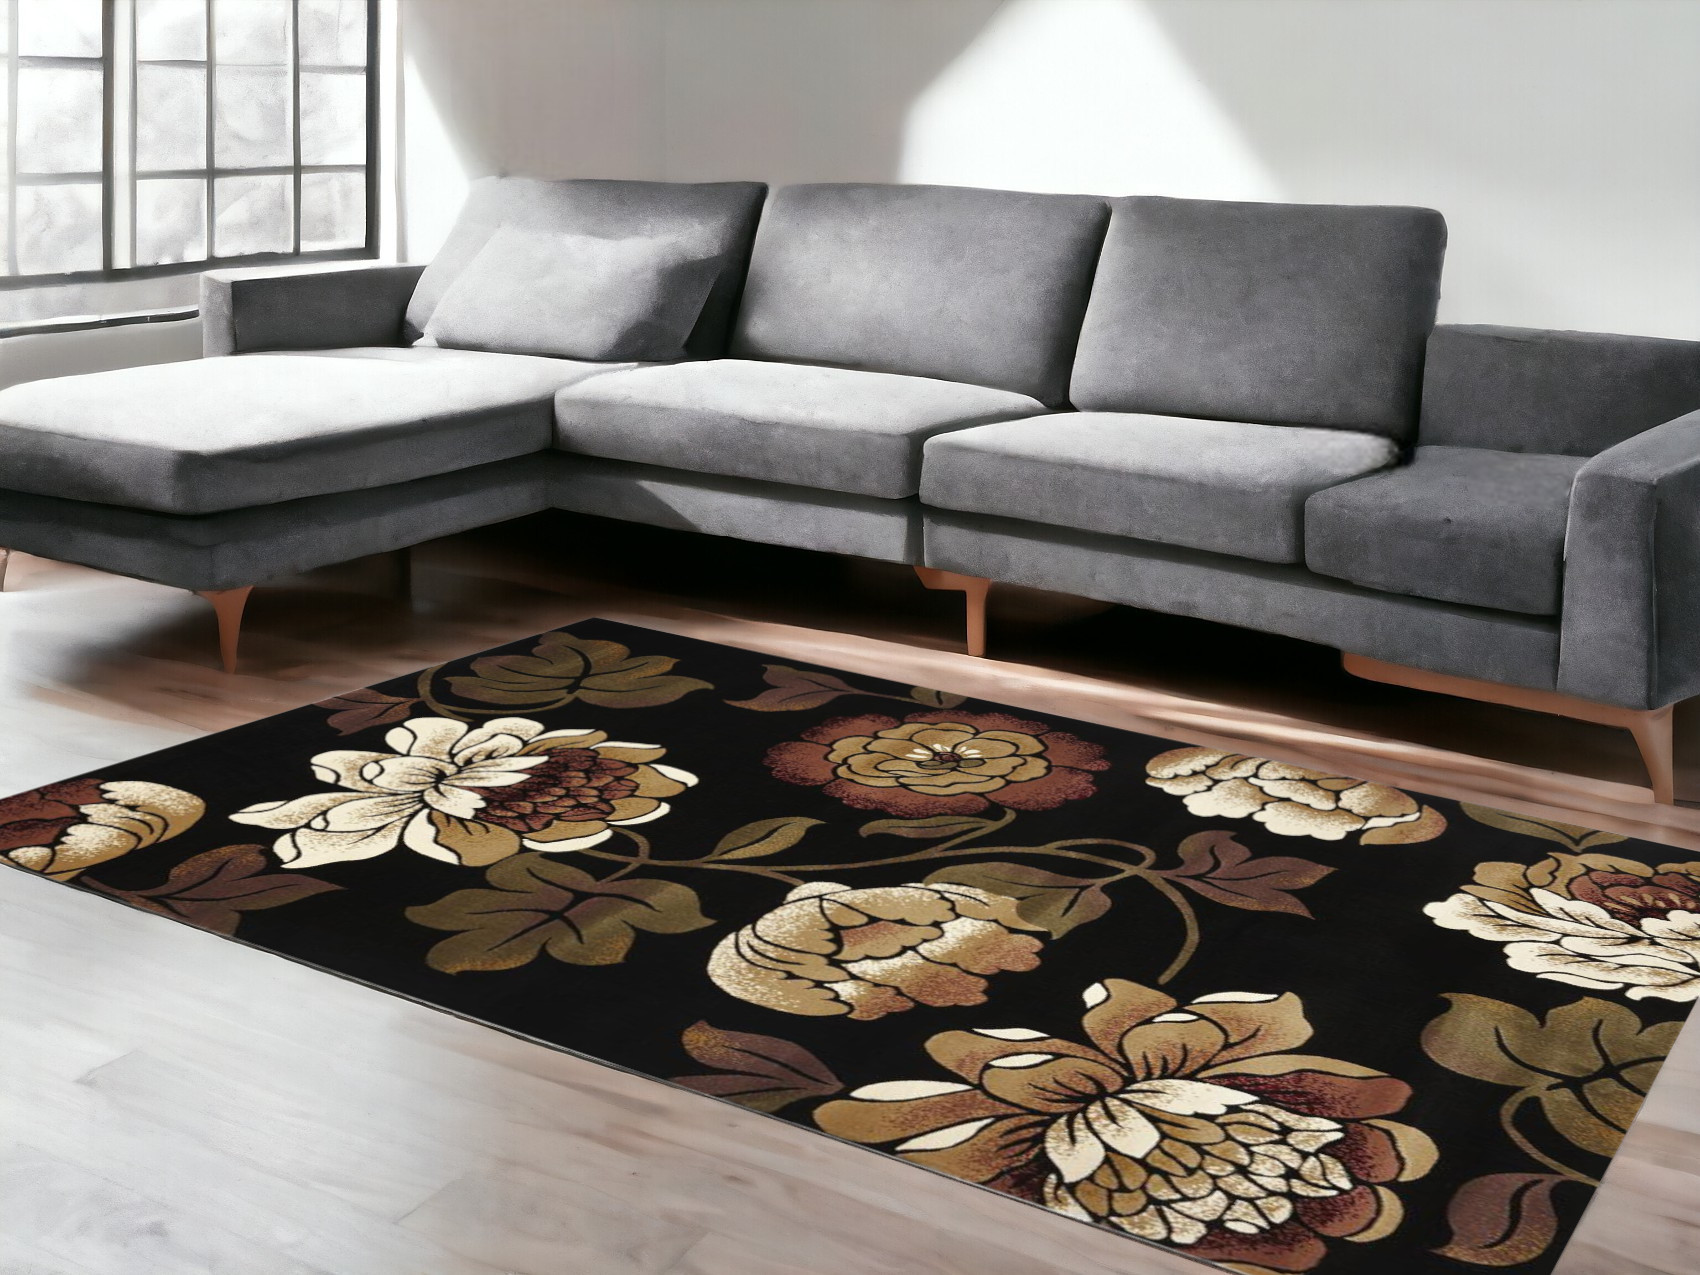 5' x 8' Black and Tan Floral Area Rug-374498-1